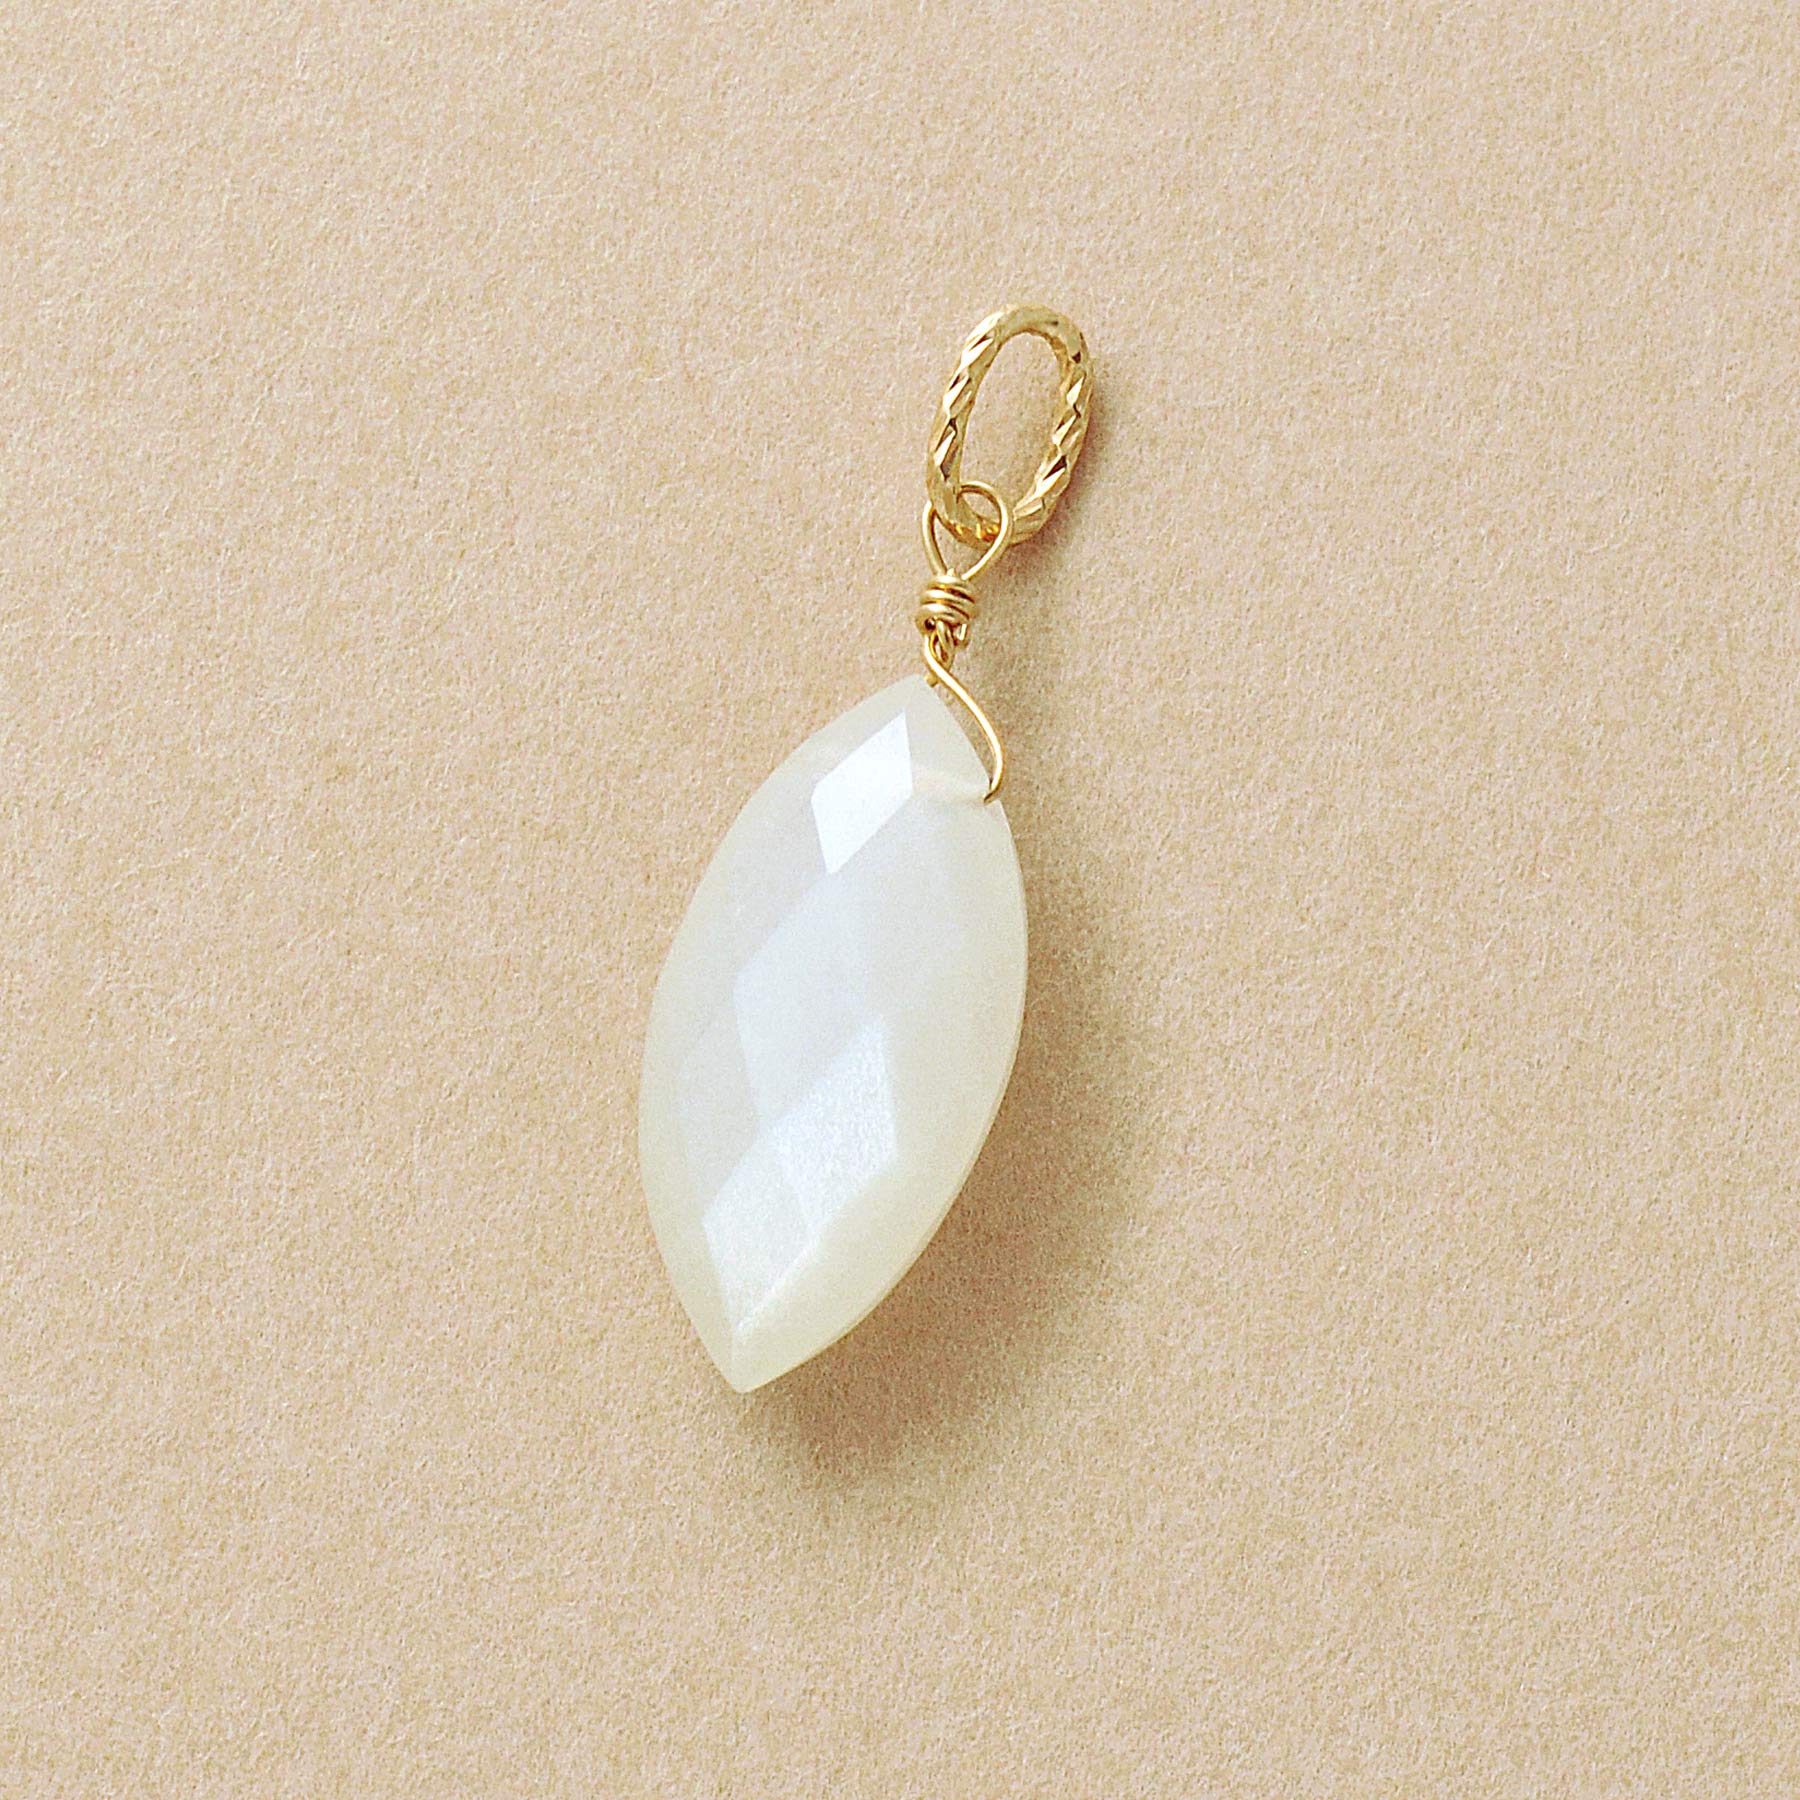 10K Moonstone Necklace Charm (Yellow Gold) - Product Image